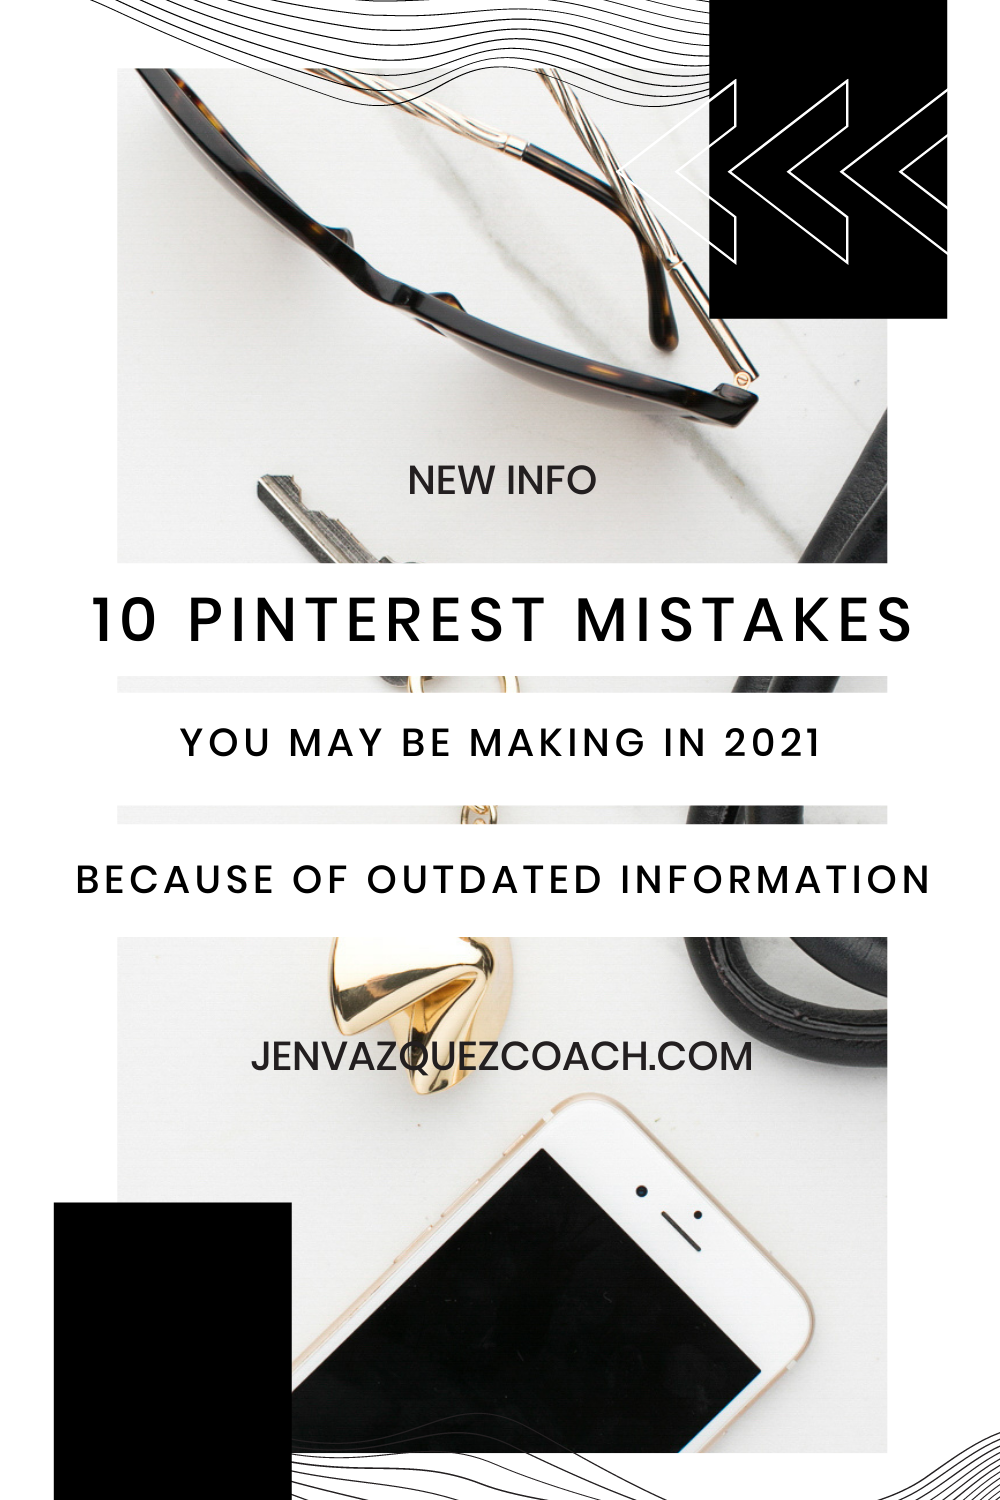 10 Pinterest mistakes you may be making in 2021 because of outdated information